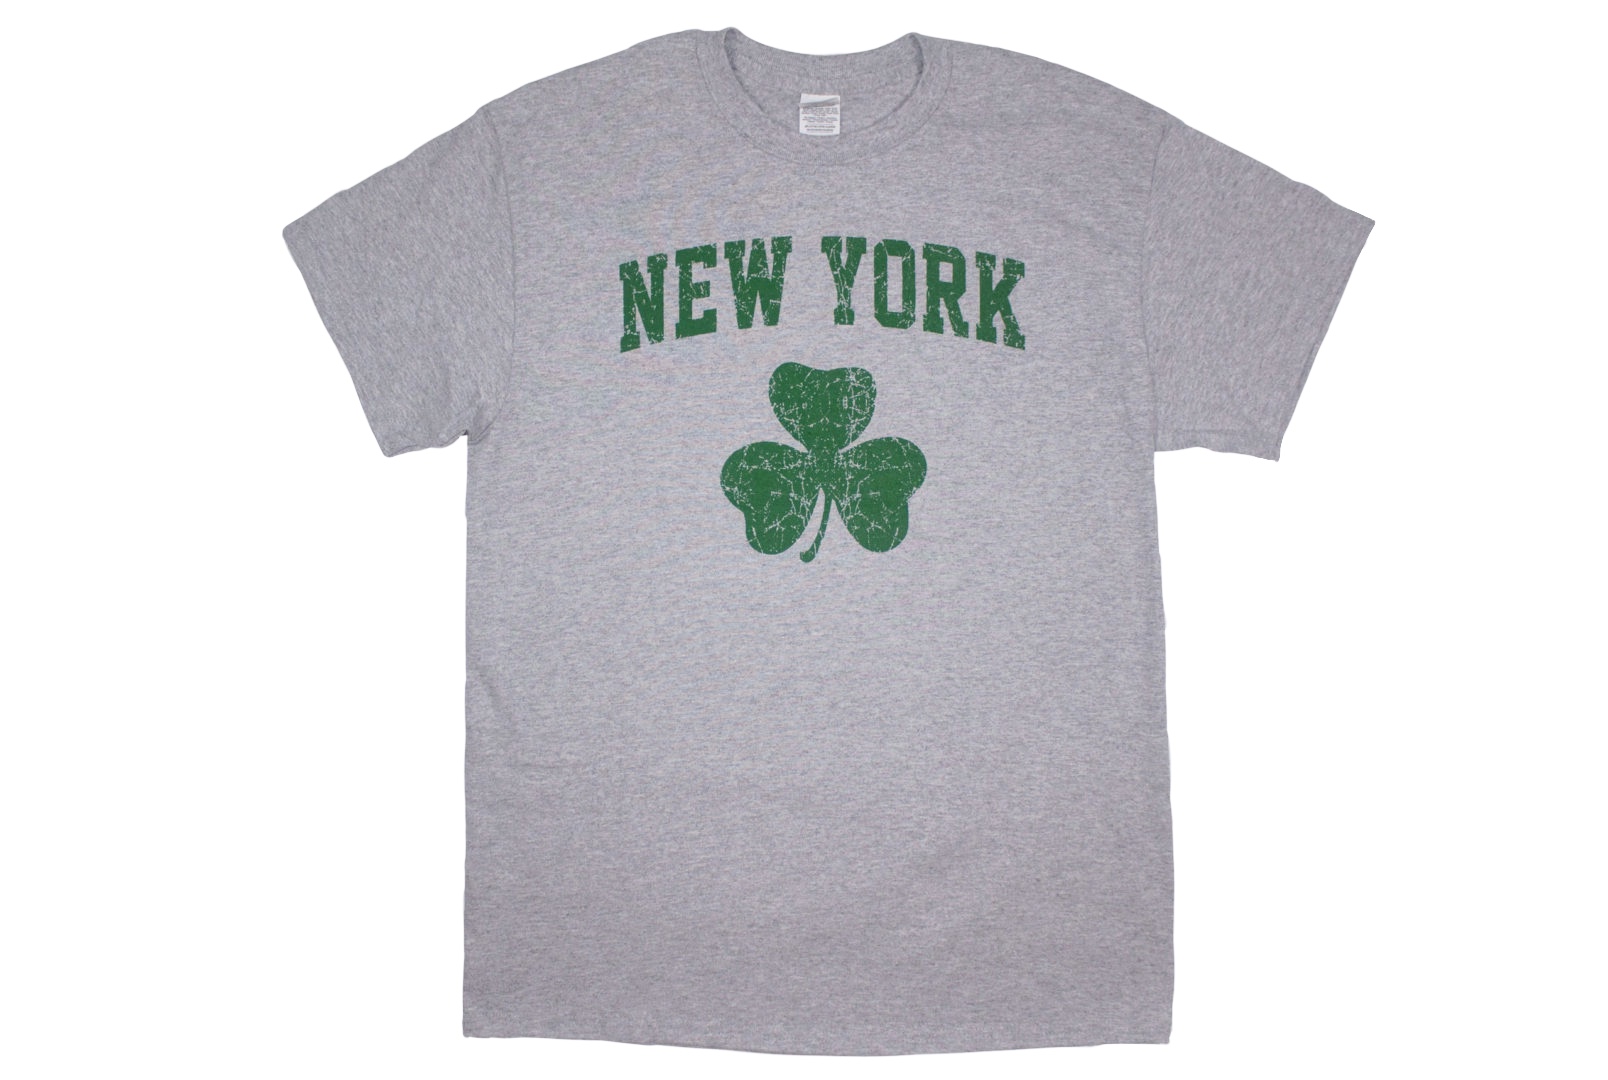 Gray shirt with New York Text